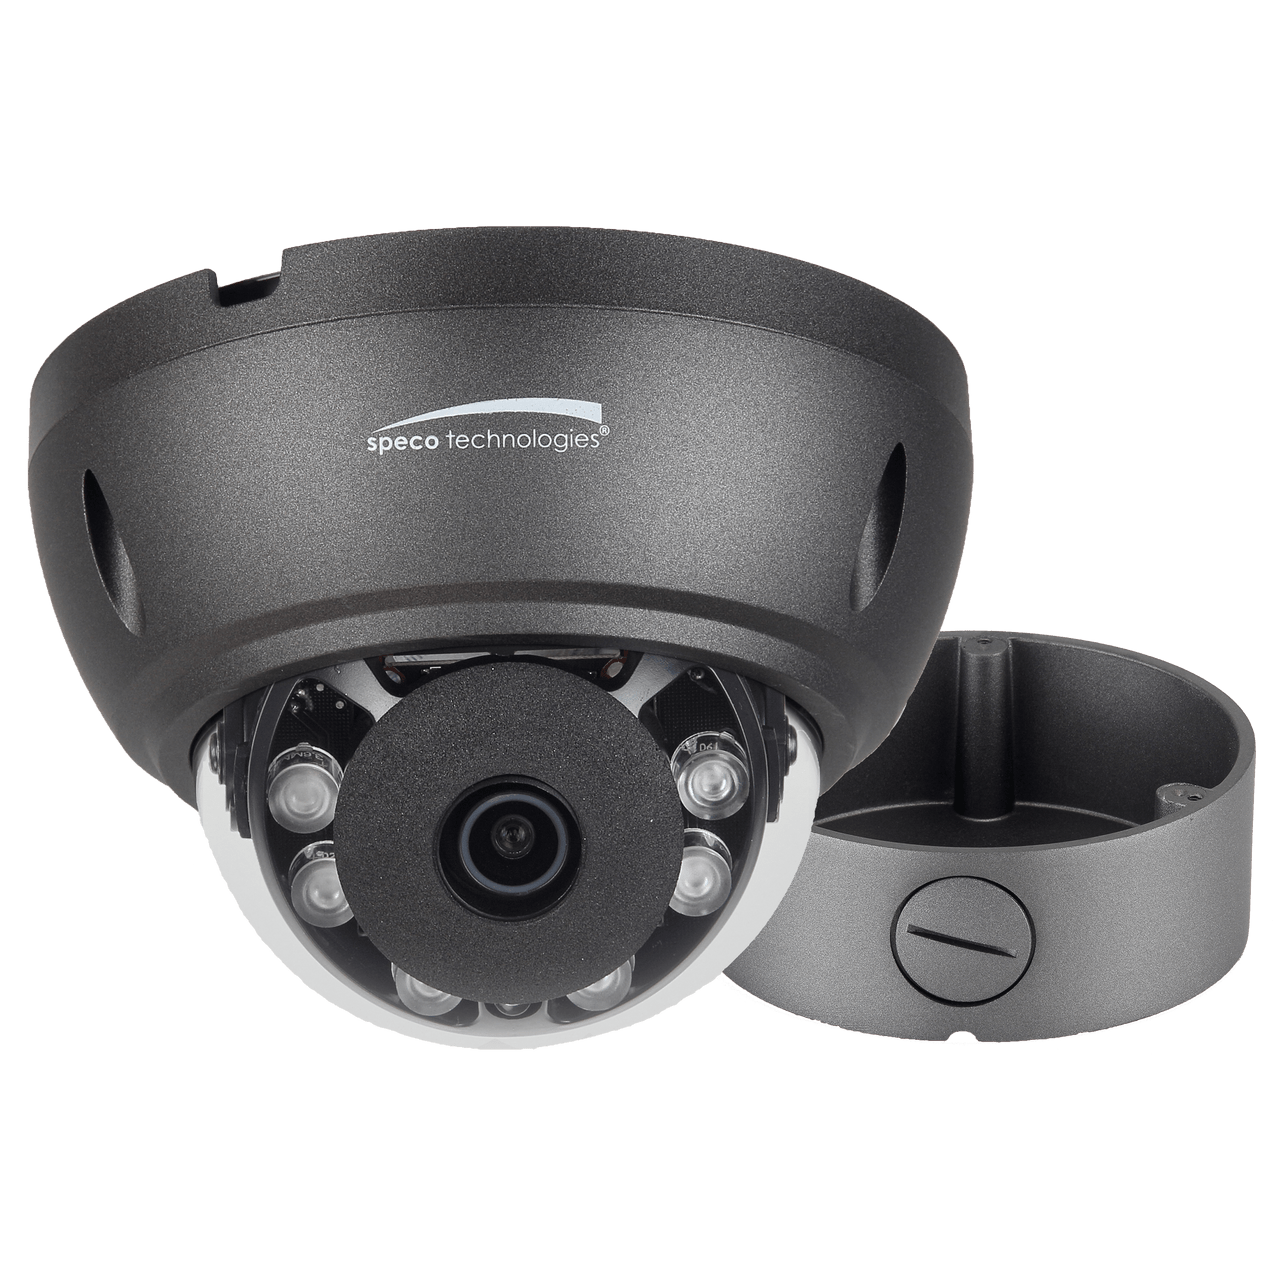 Speco Technologies SPE-HTD8TG 4K HD-TVI Dome, IR, 2.8mm lens, Grey housing, Included Junc Box, TAA (SPE-HTD8TG)